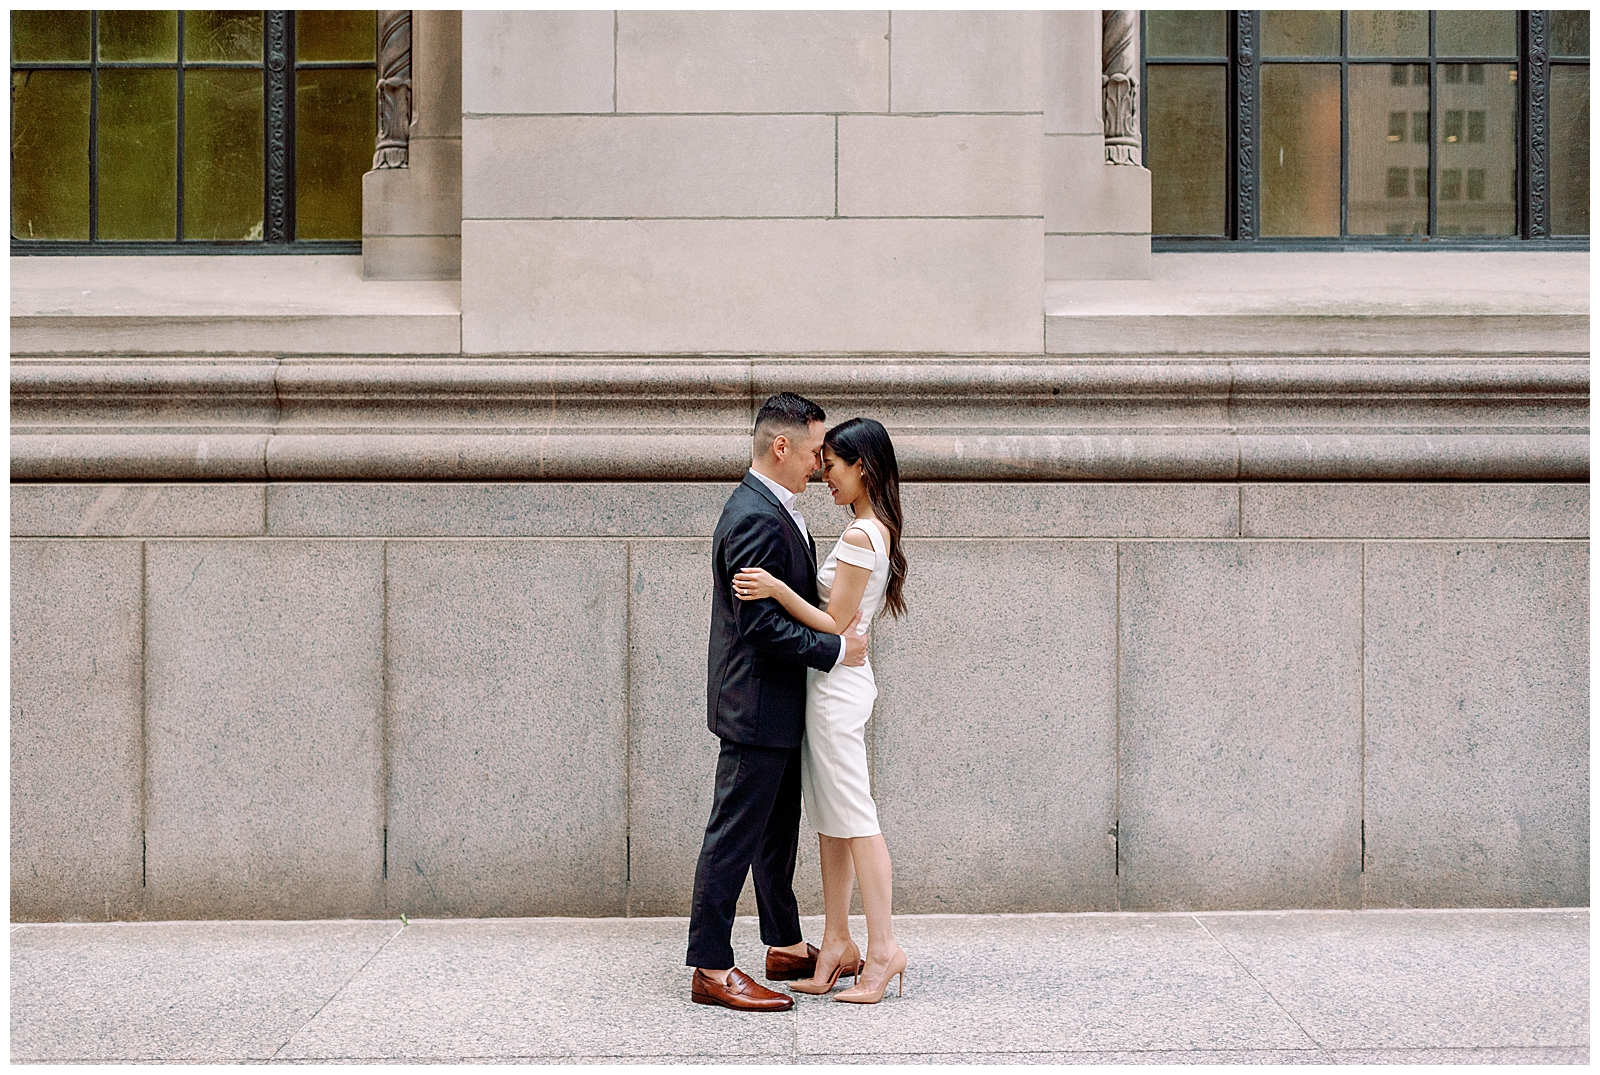 Downtown Toronto Financial District Engagement Session Modern Editorial Timeless Couple Embracing in Front of Beautiful Door | Toronto Wedding Photography Jacqueline James Photography